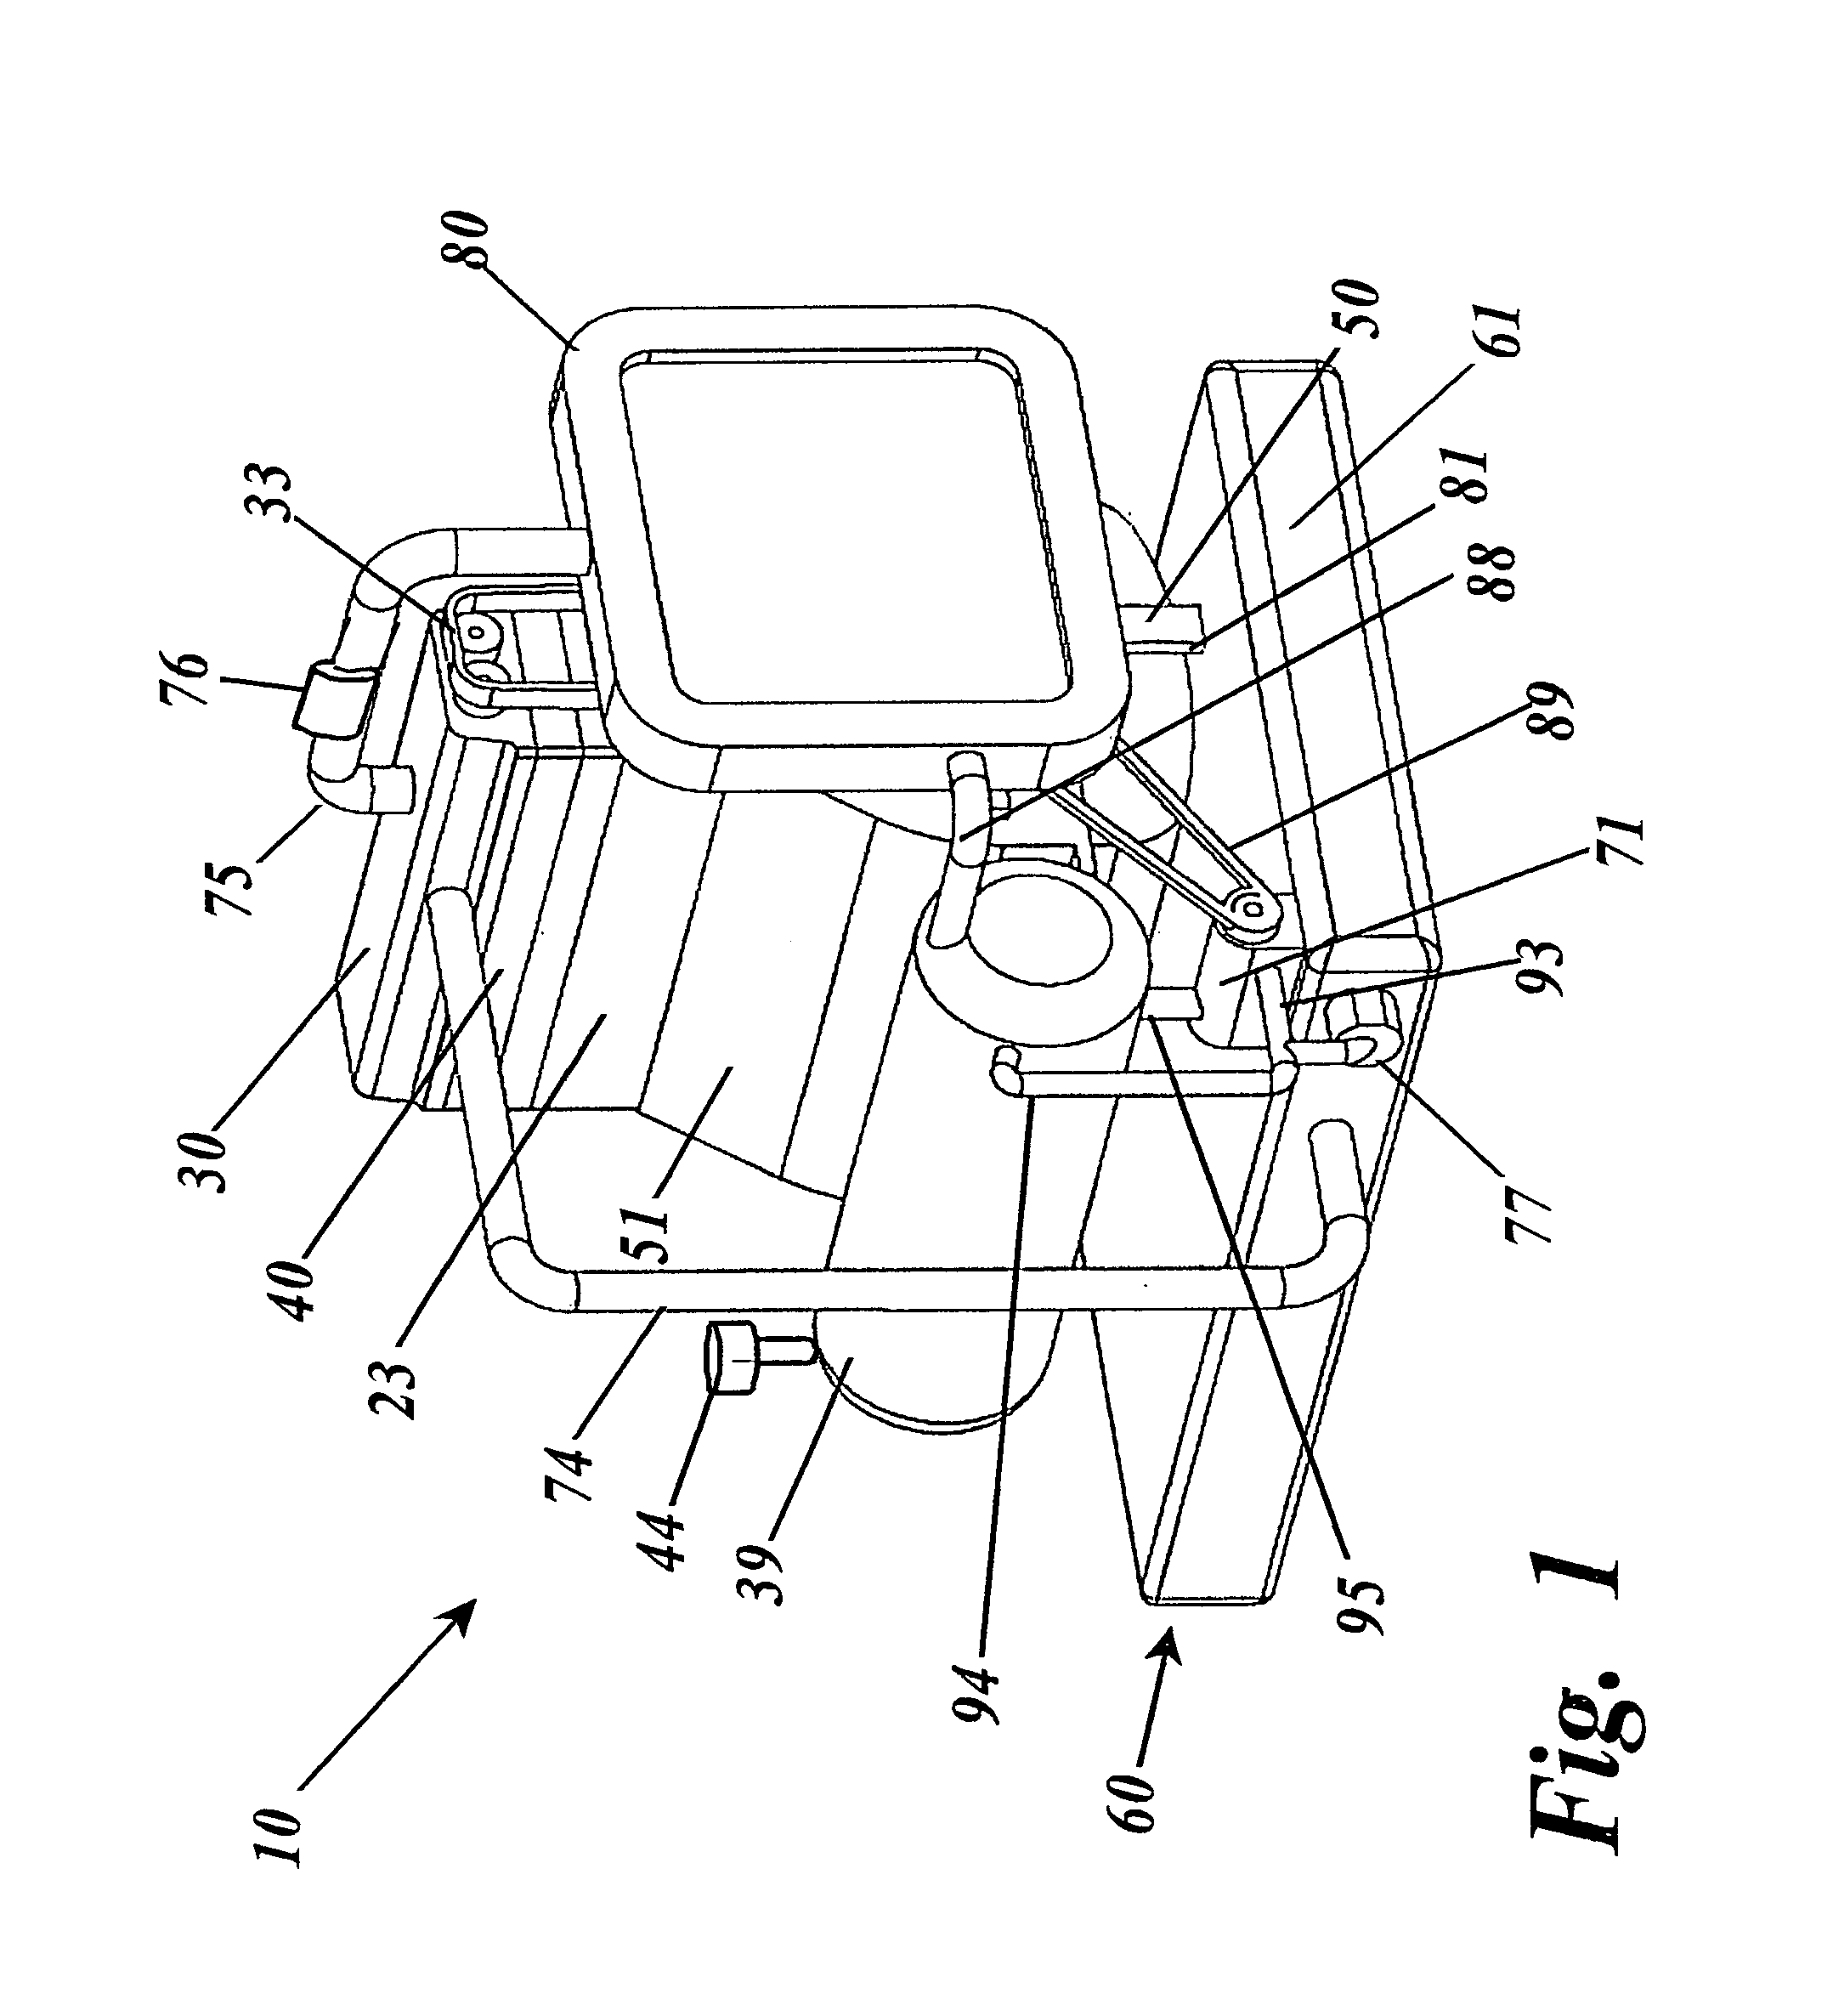 Thermal engine for operation with noncombustible fuels